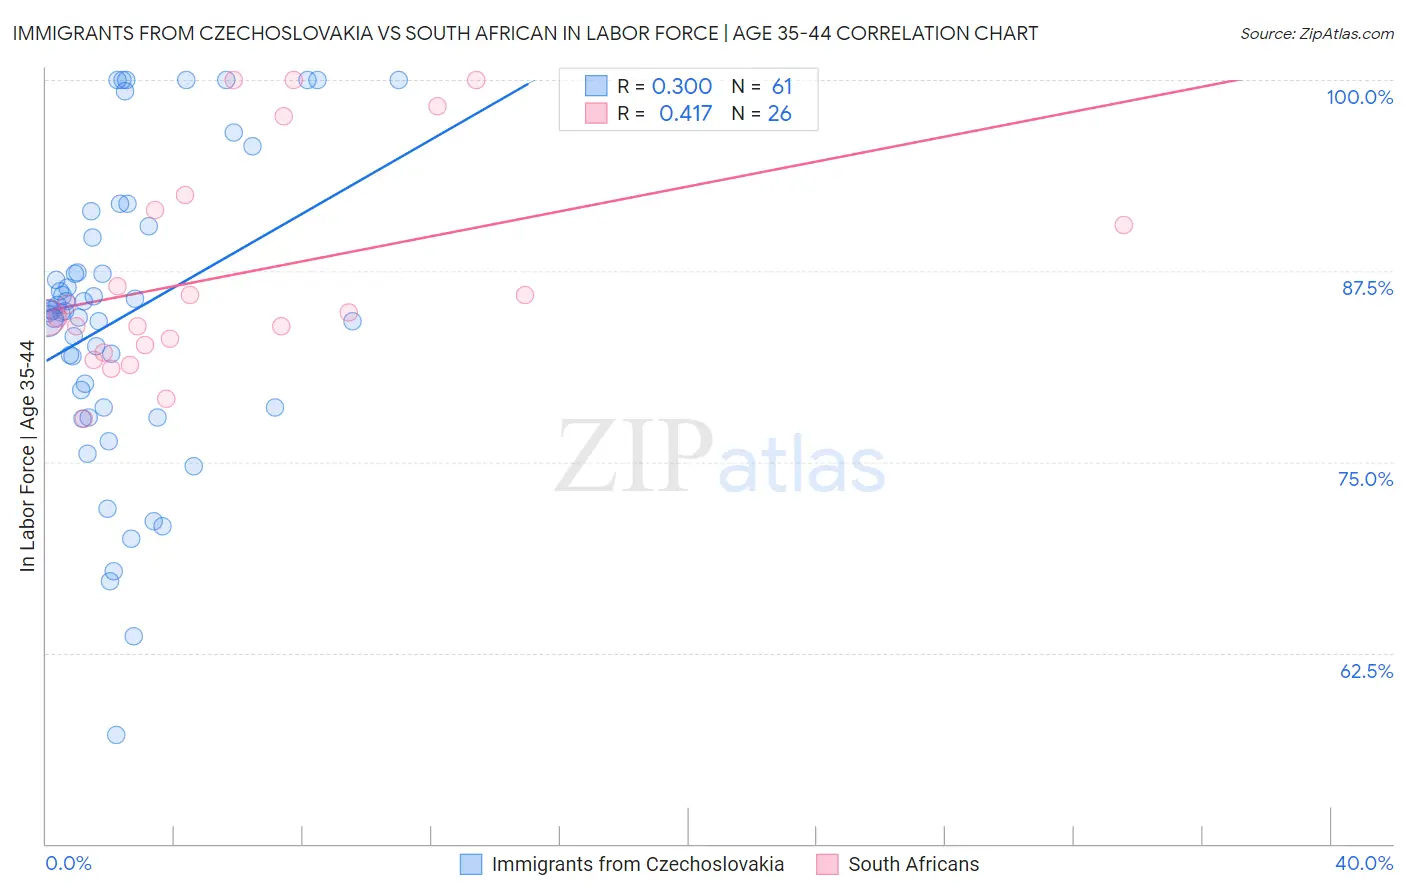 Immigrants from Czechoslovakia vs South African In Labor Force | Age 35-44